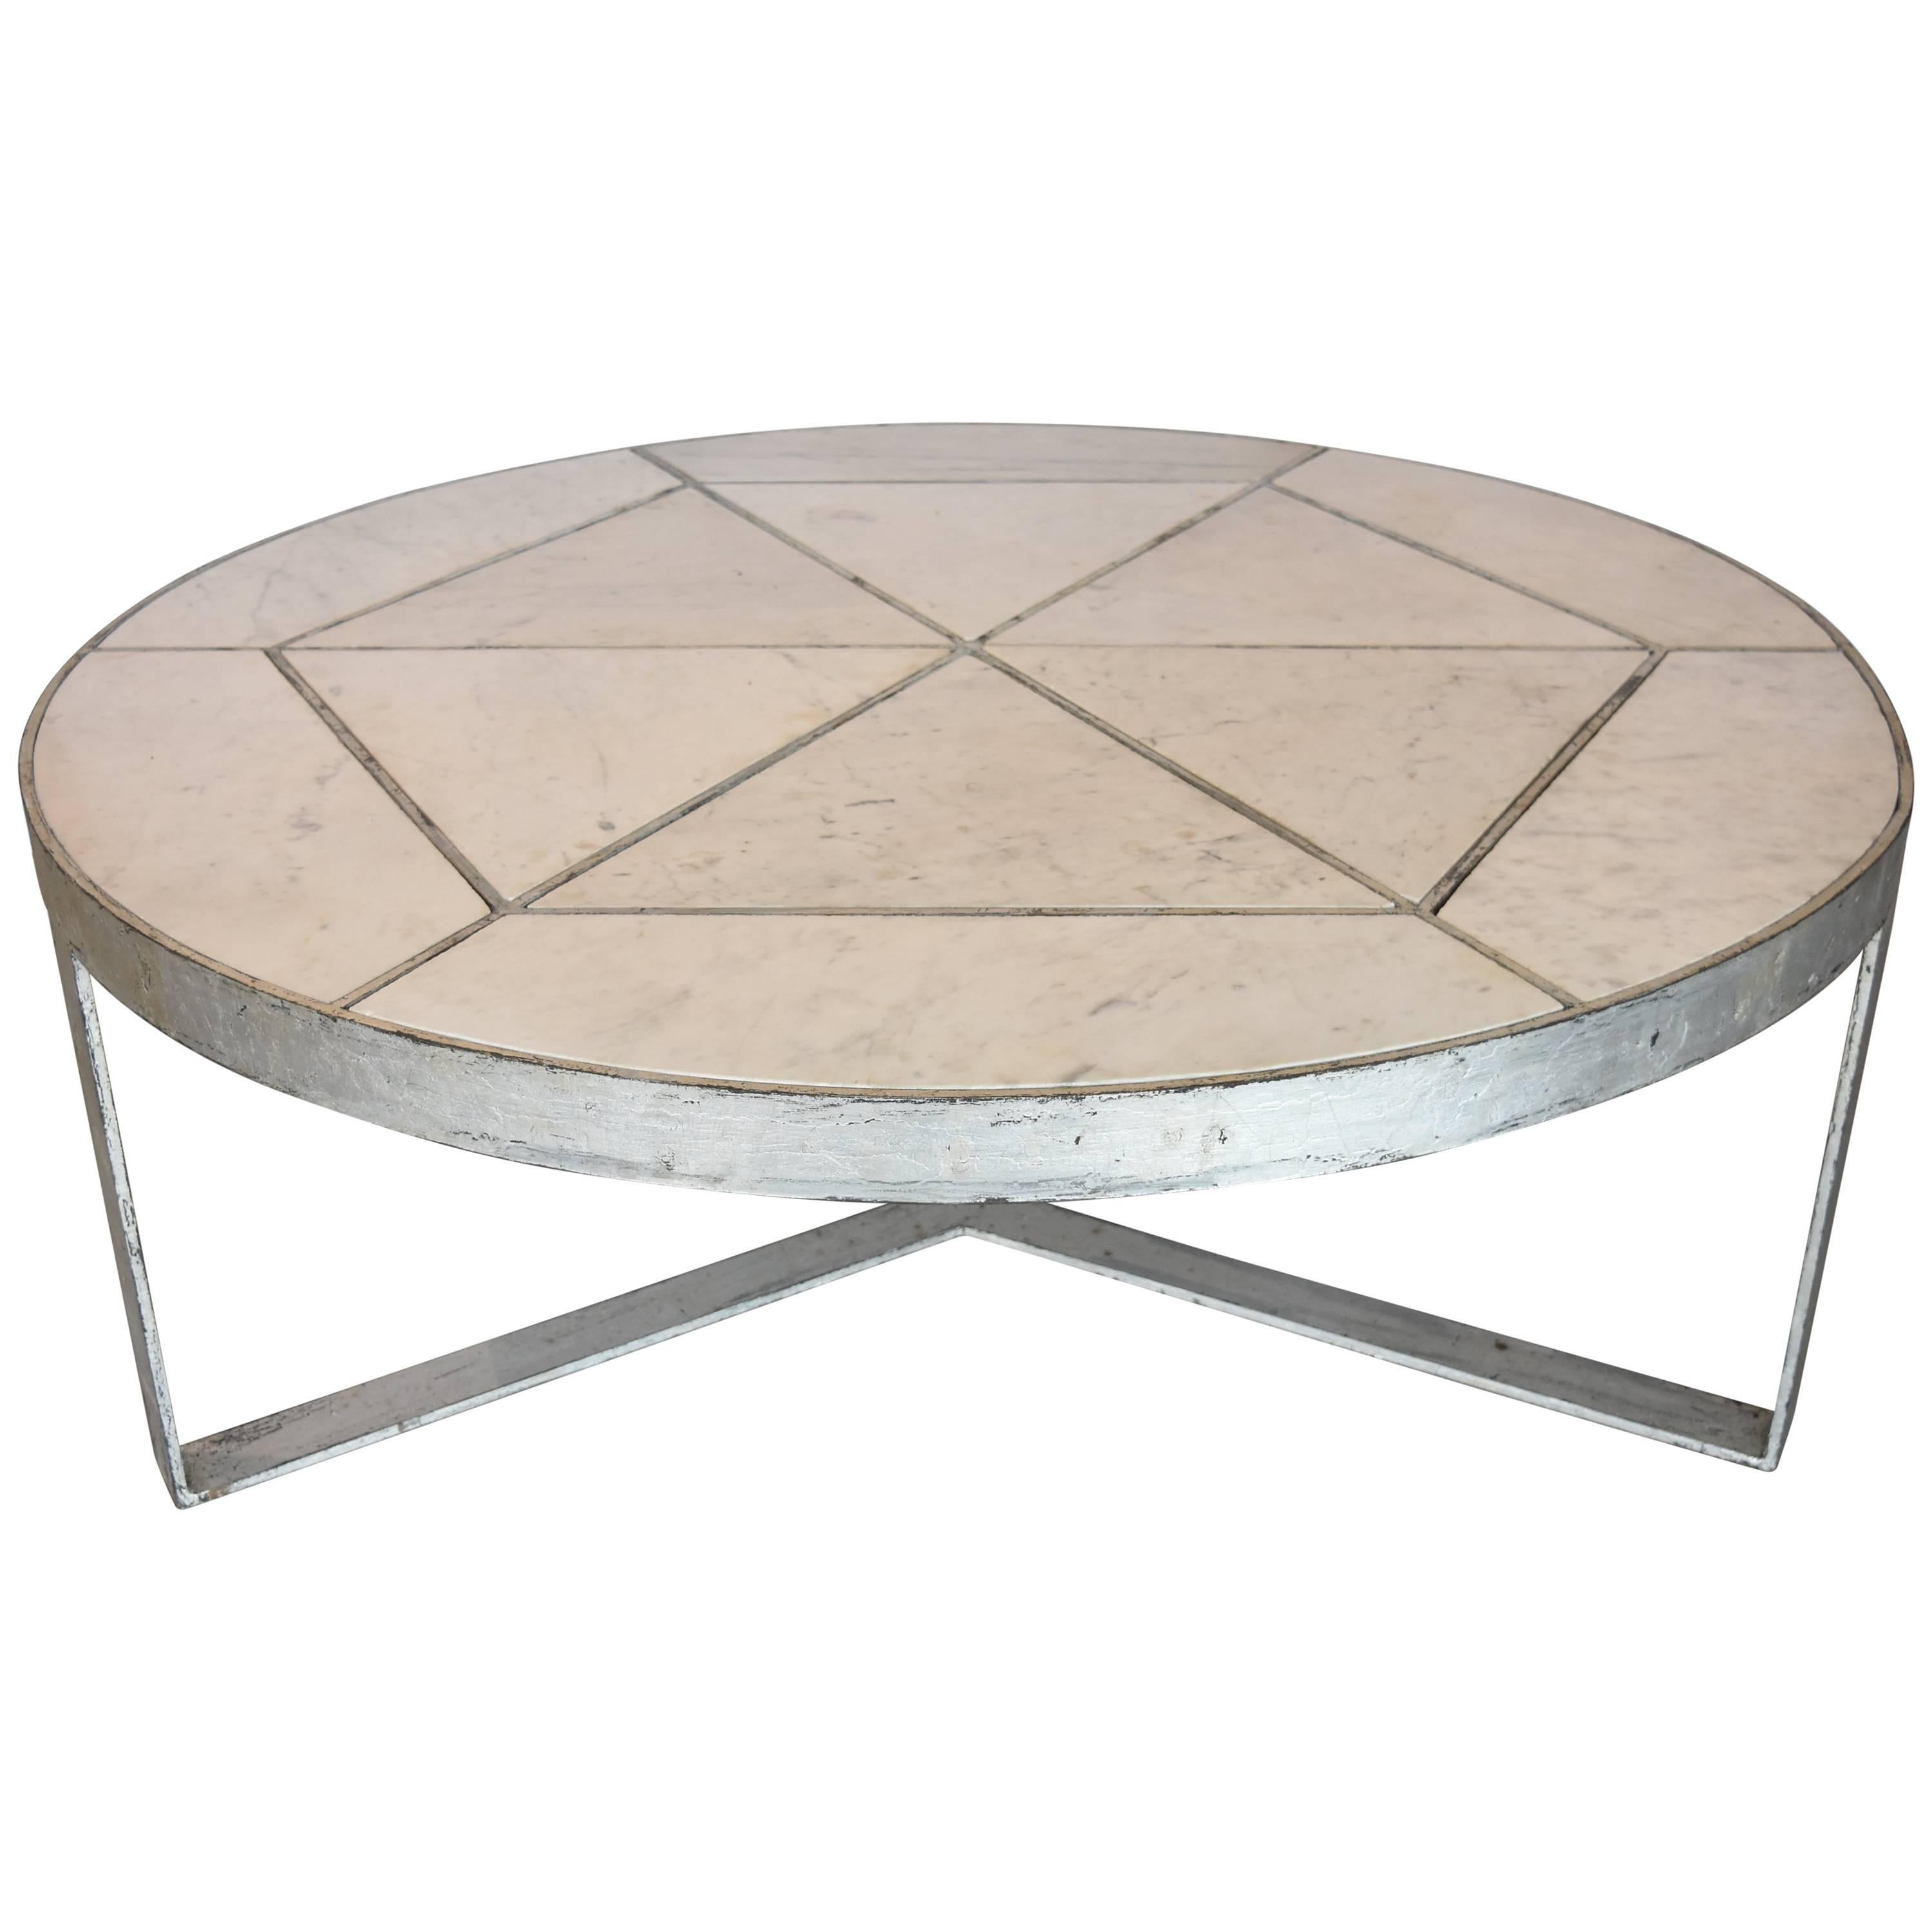 Silver Leaf over Iron with Marble Inset in Round Coffee Table from Europe